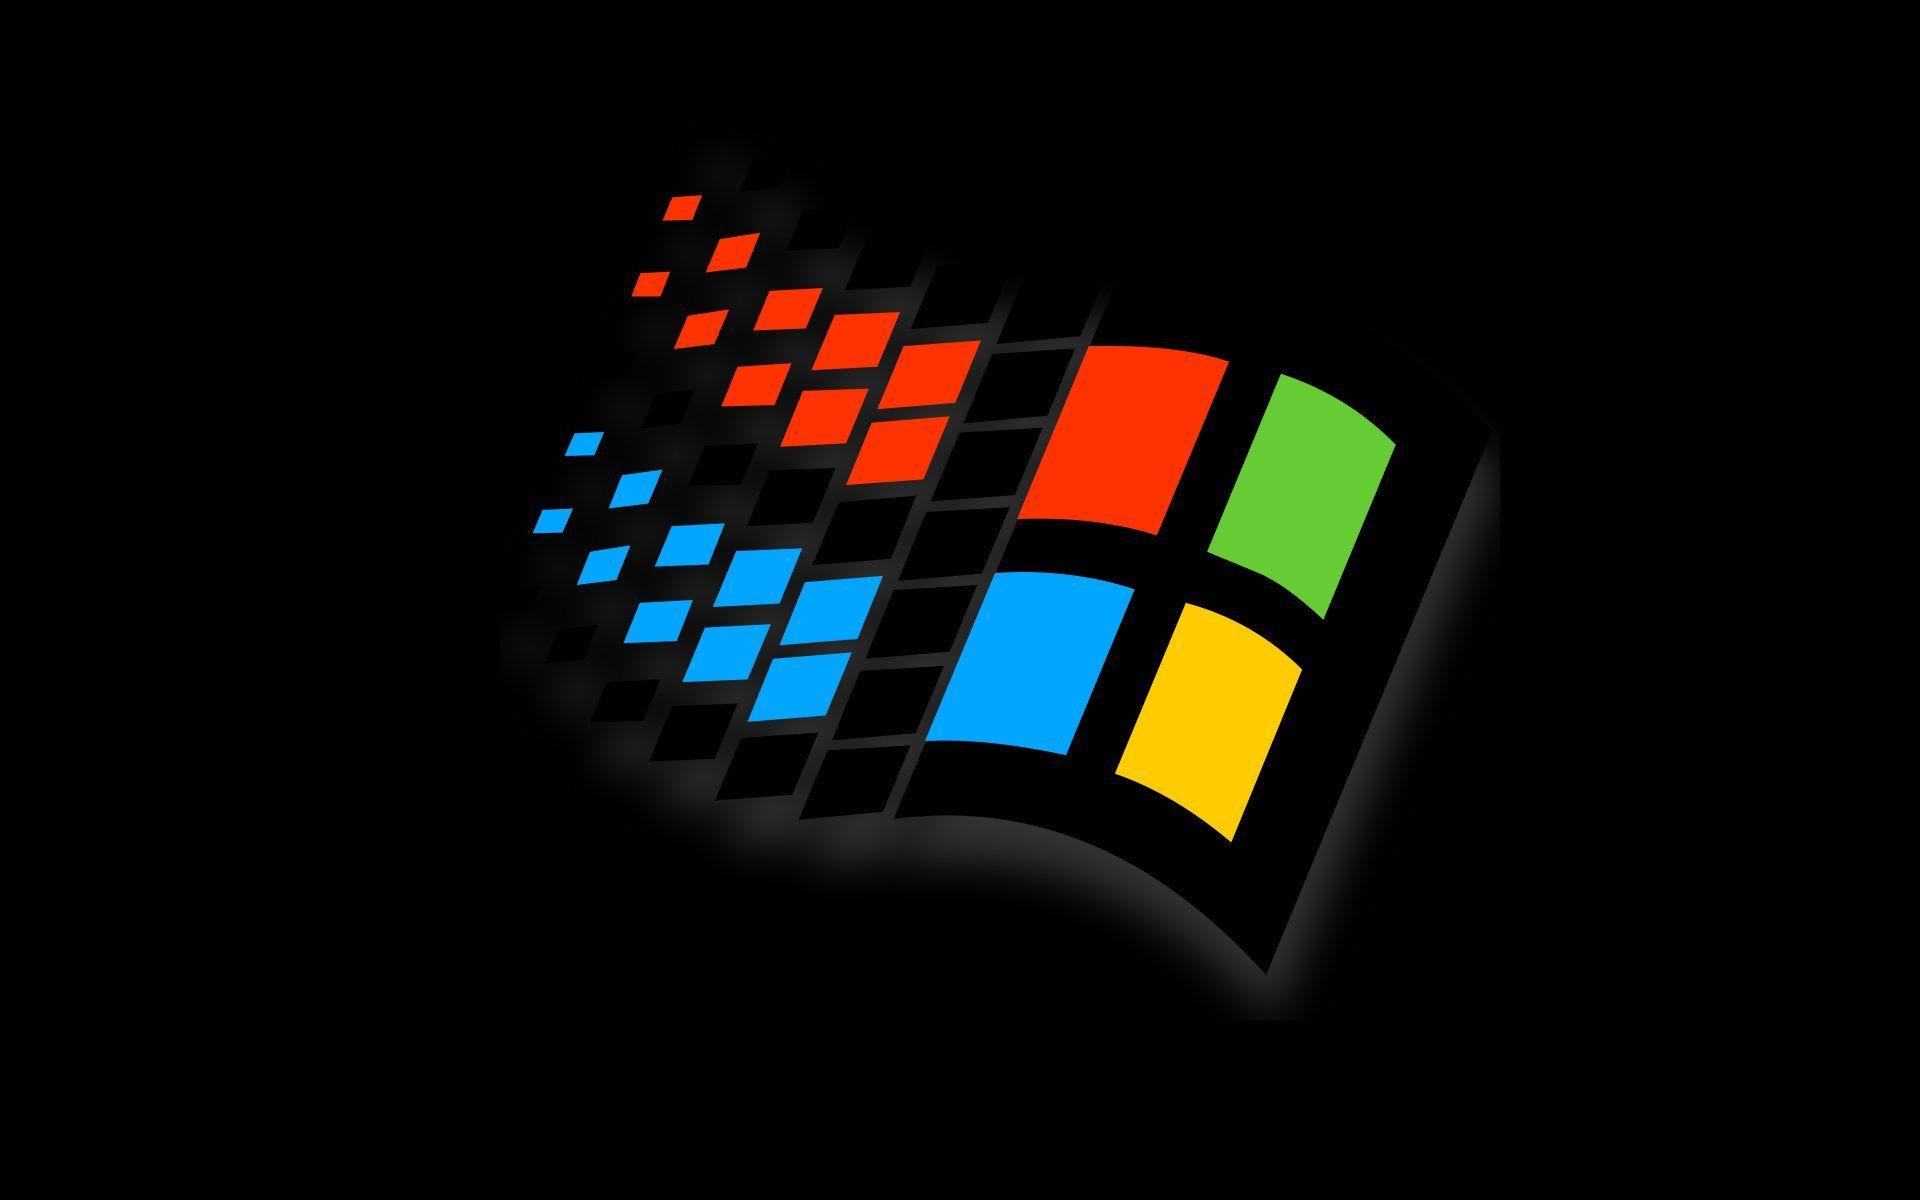 Windows 98 Wallpaper  Microsoft  Free Download Borrow and Streaming   Internet Archive